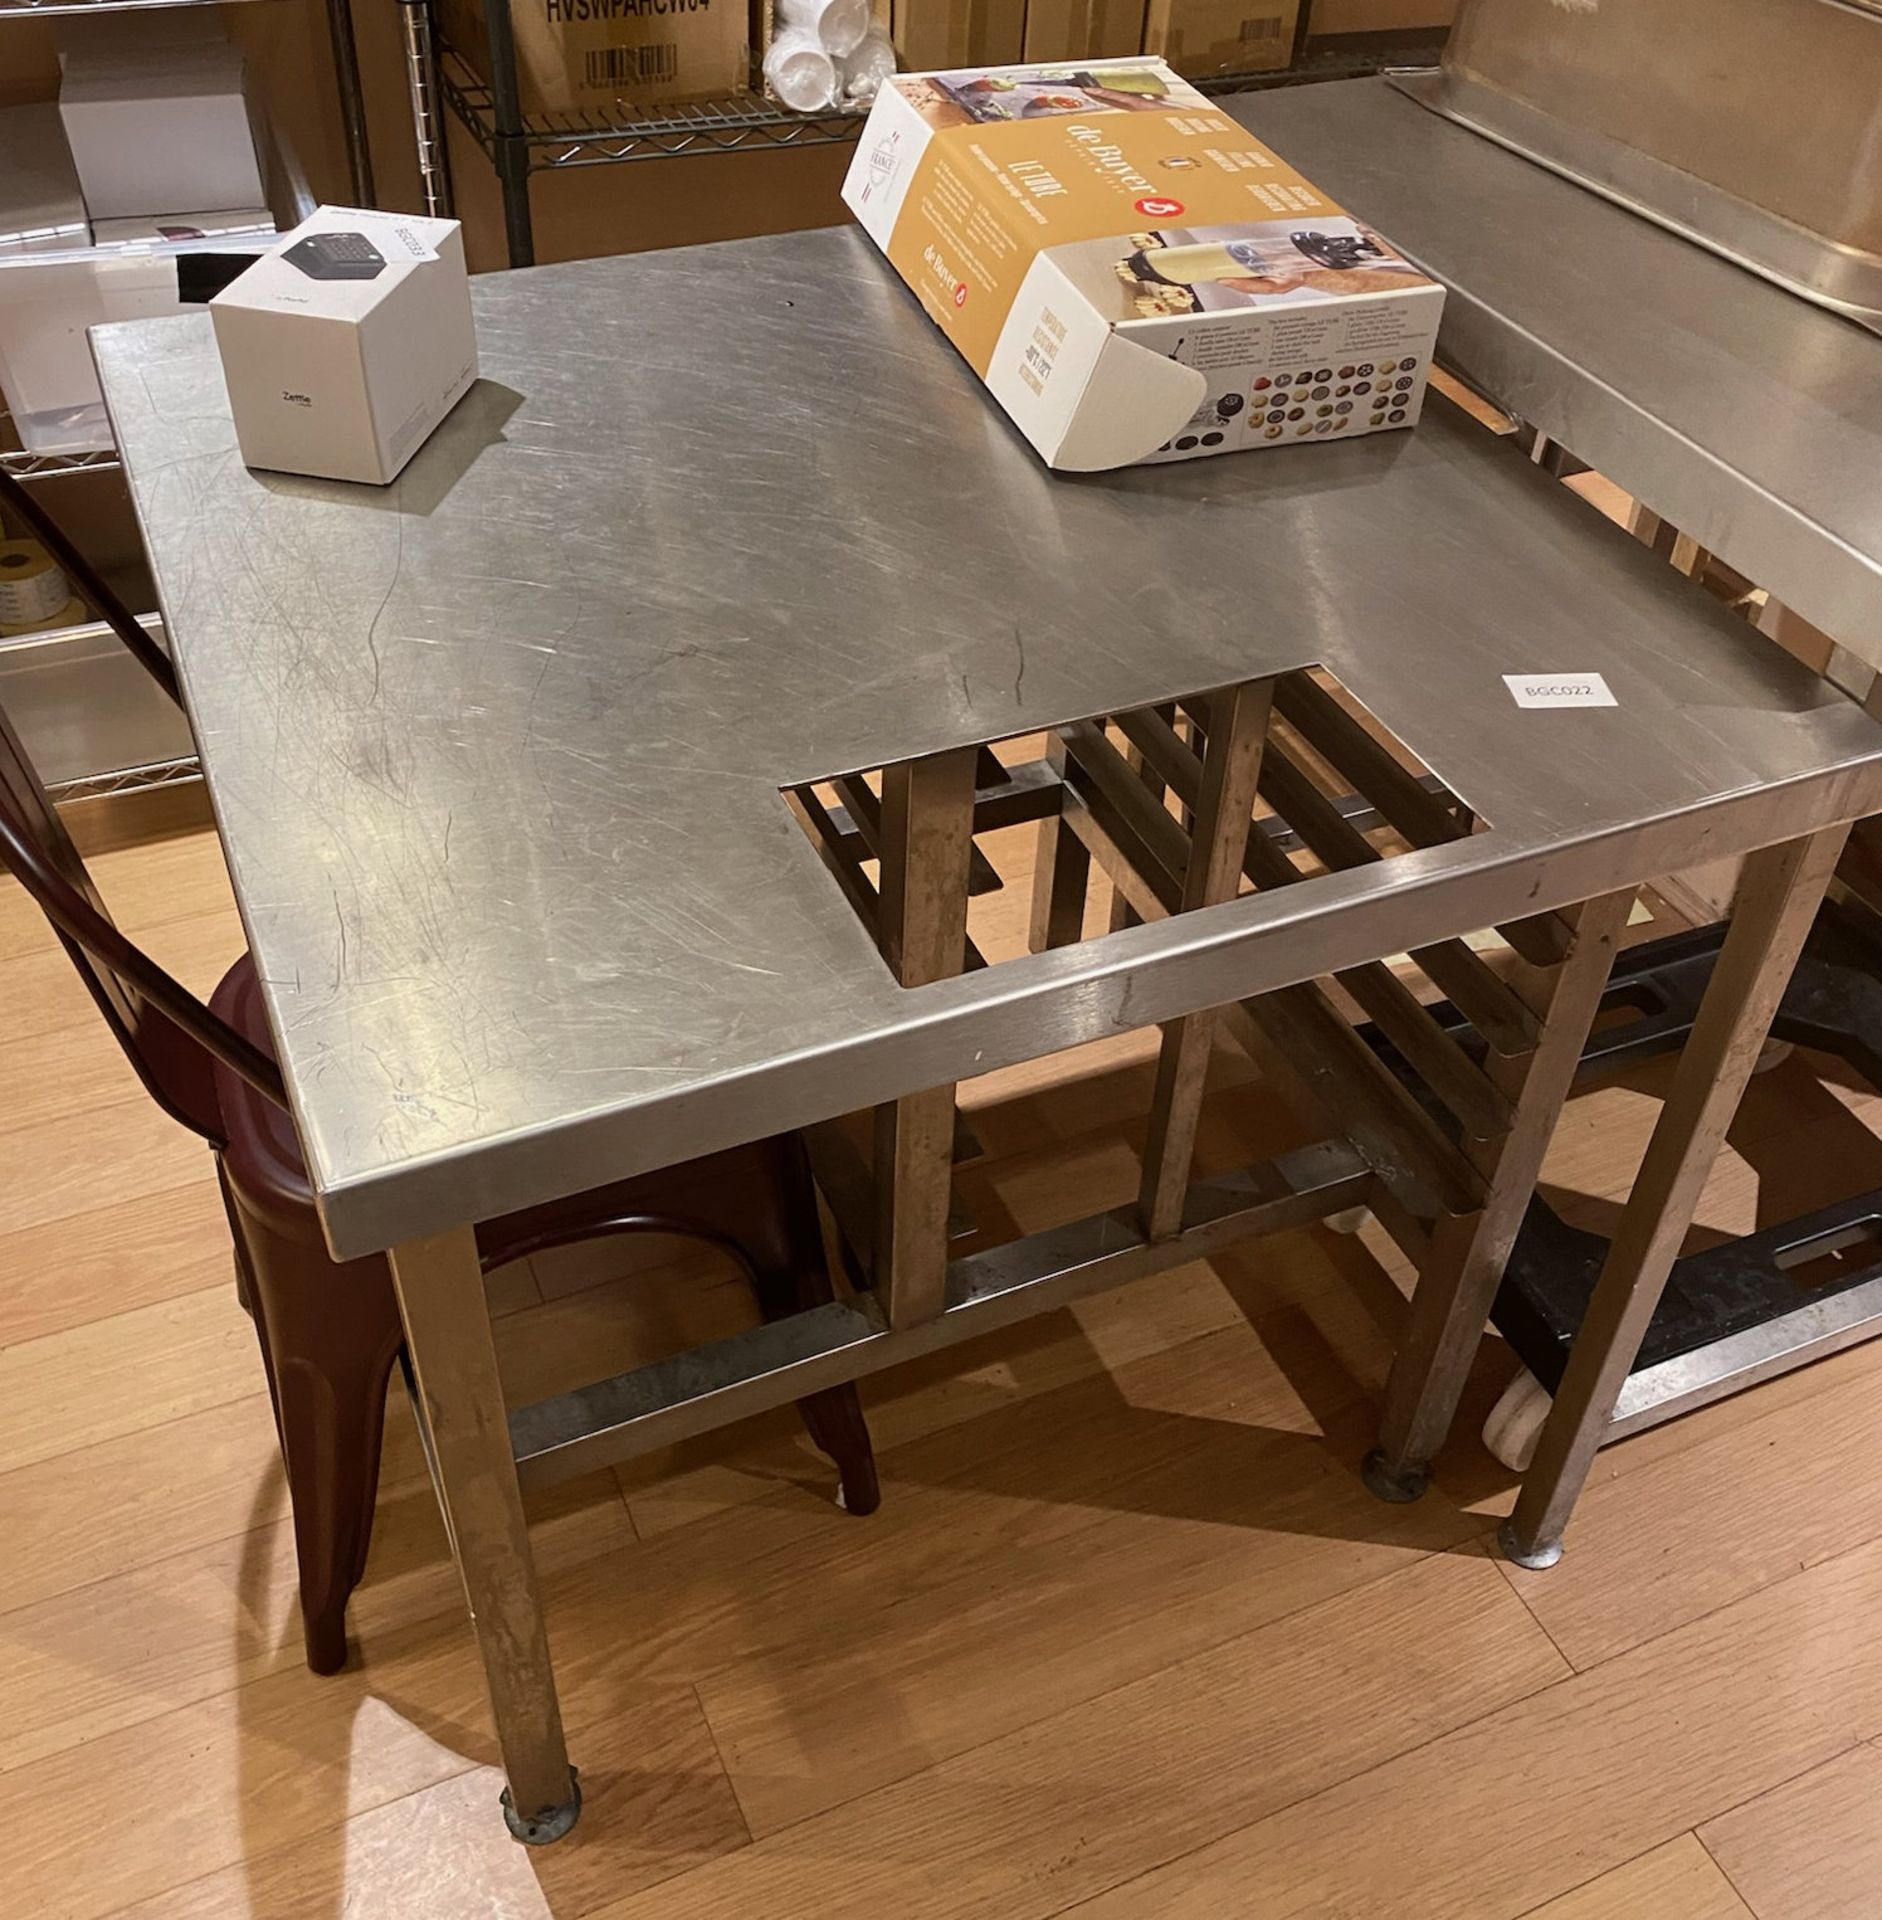 1 x Stainless Steel Prep Table - Approx 700 X 700 X 900Mm With Space Below For Trays - Ref: BGC022 -